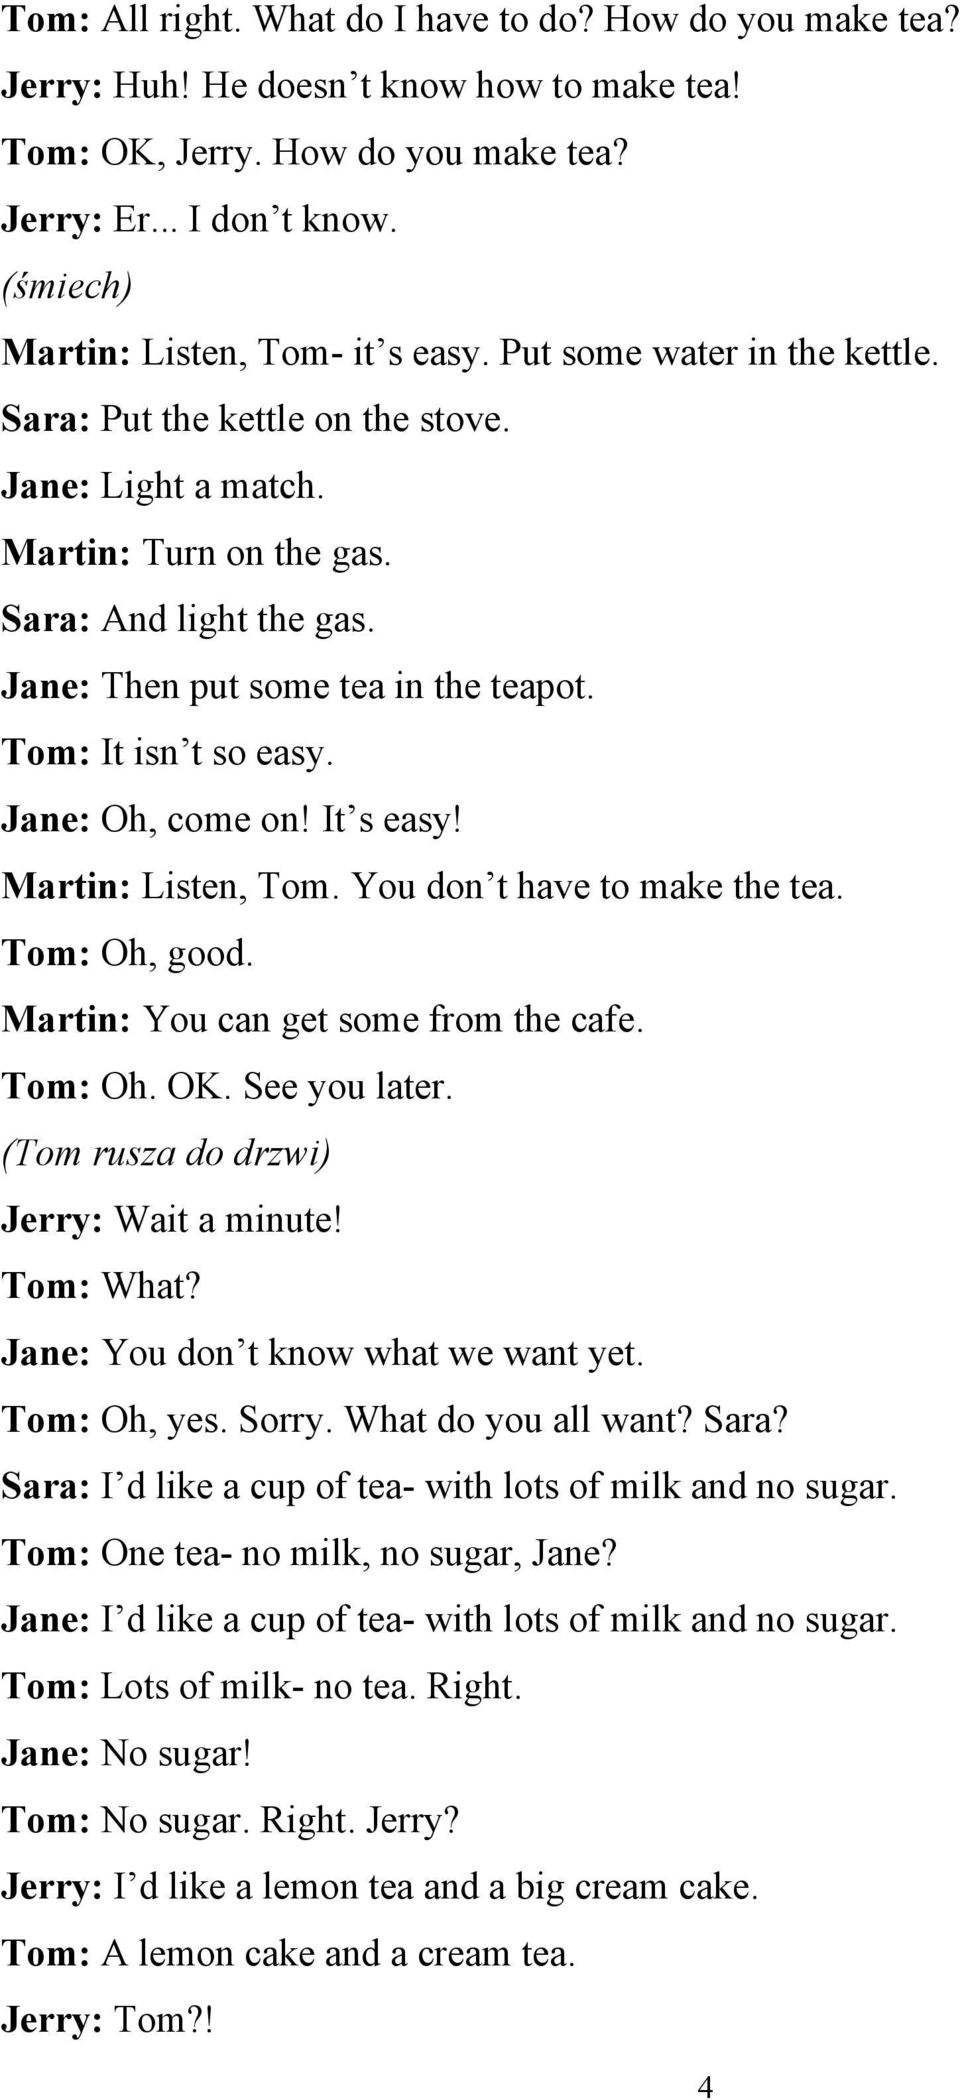 Jane: Then put some tea in the teapot. Tom: It isn t so easy. Jane: Oh, come on! It s easy! Martin: Listen, Tom. You don t have to make the tea. Tom: Oh, good. Martin: You can get some from the cafe.